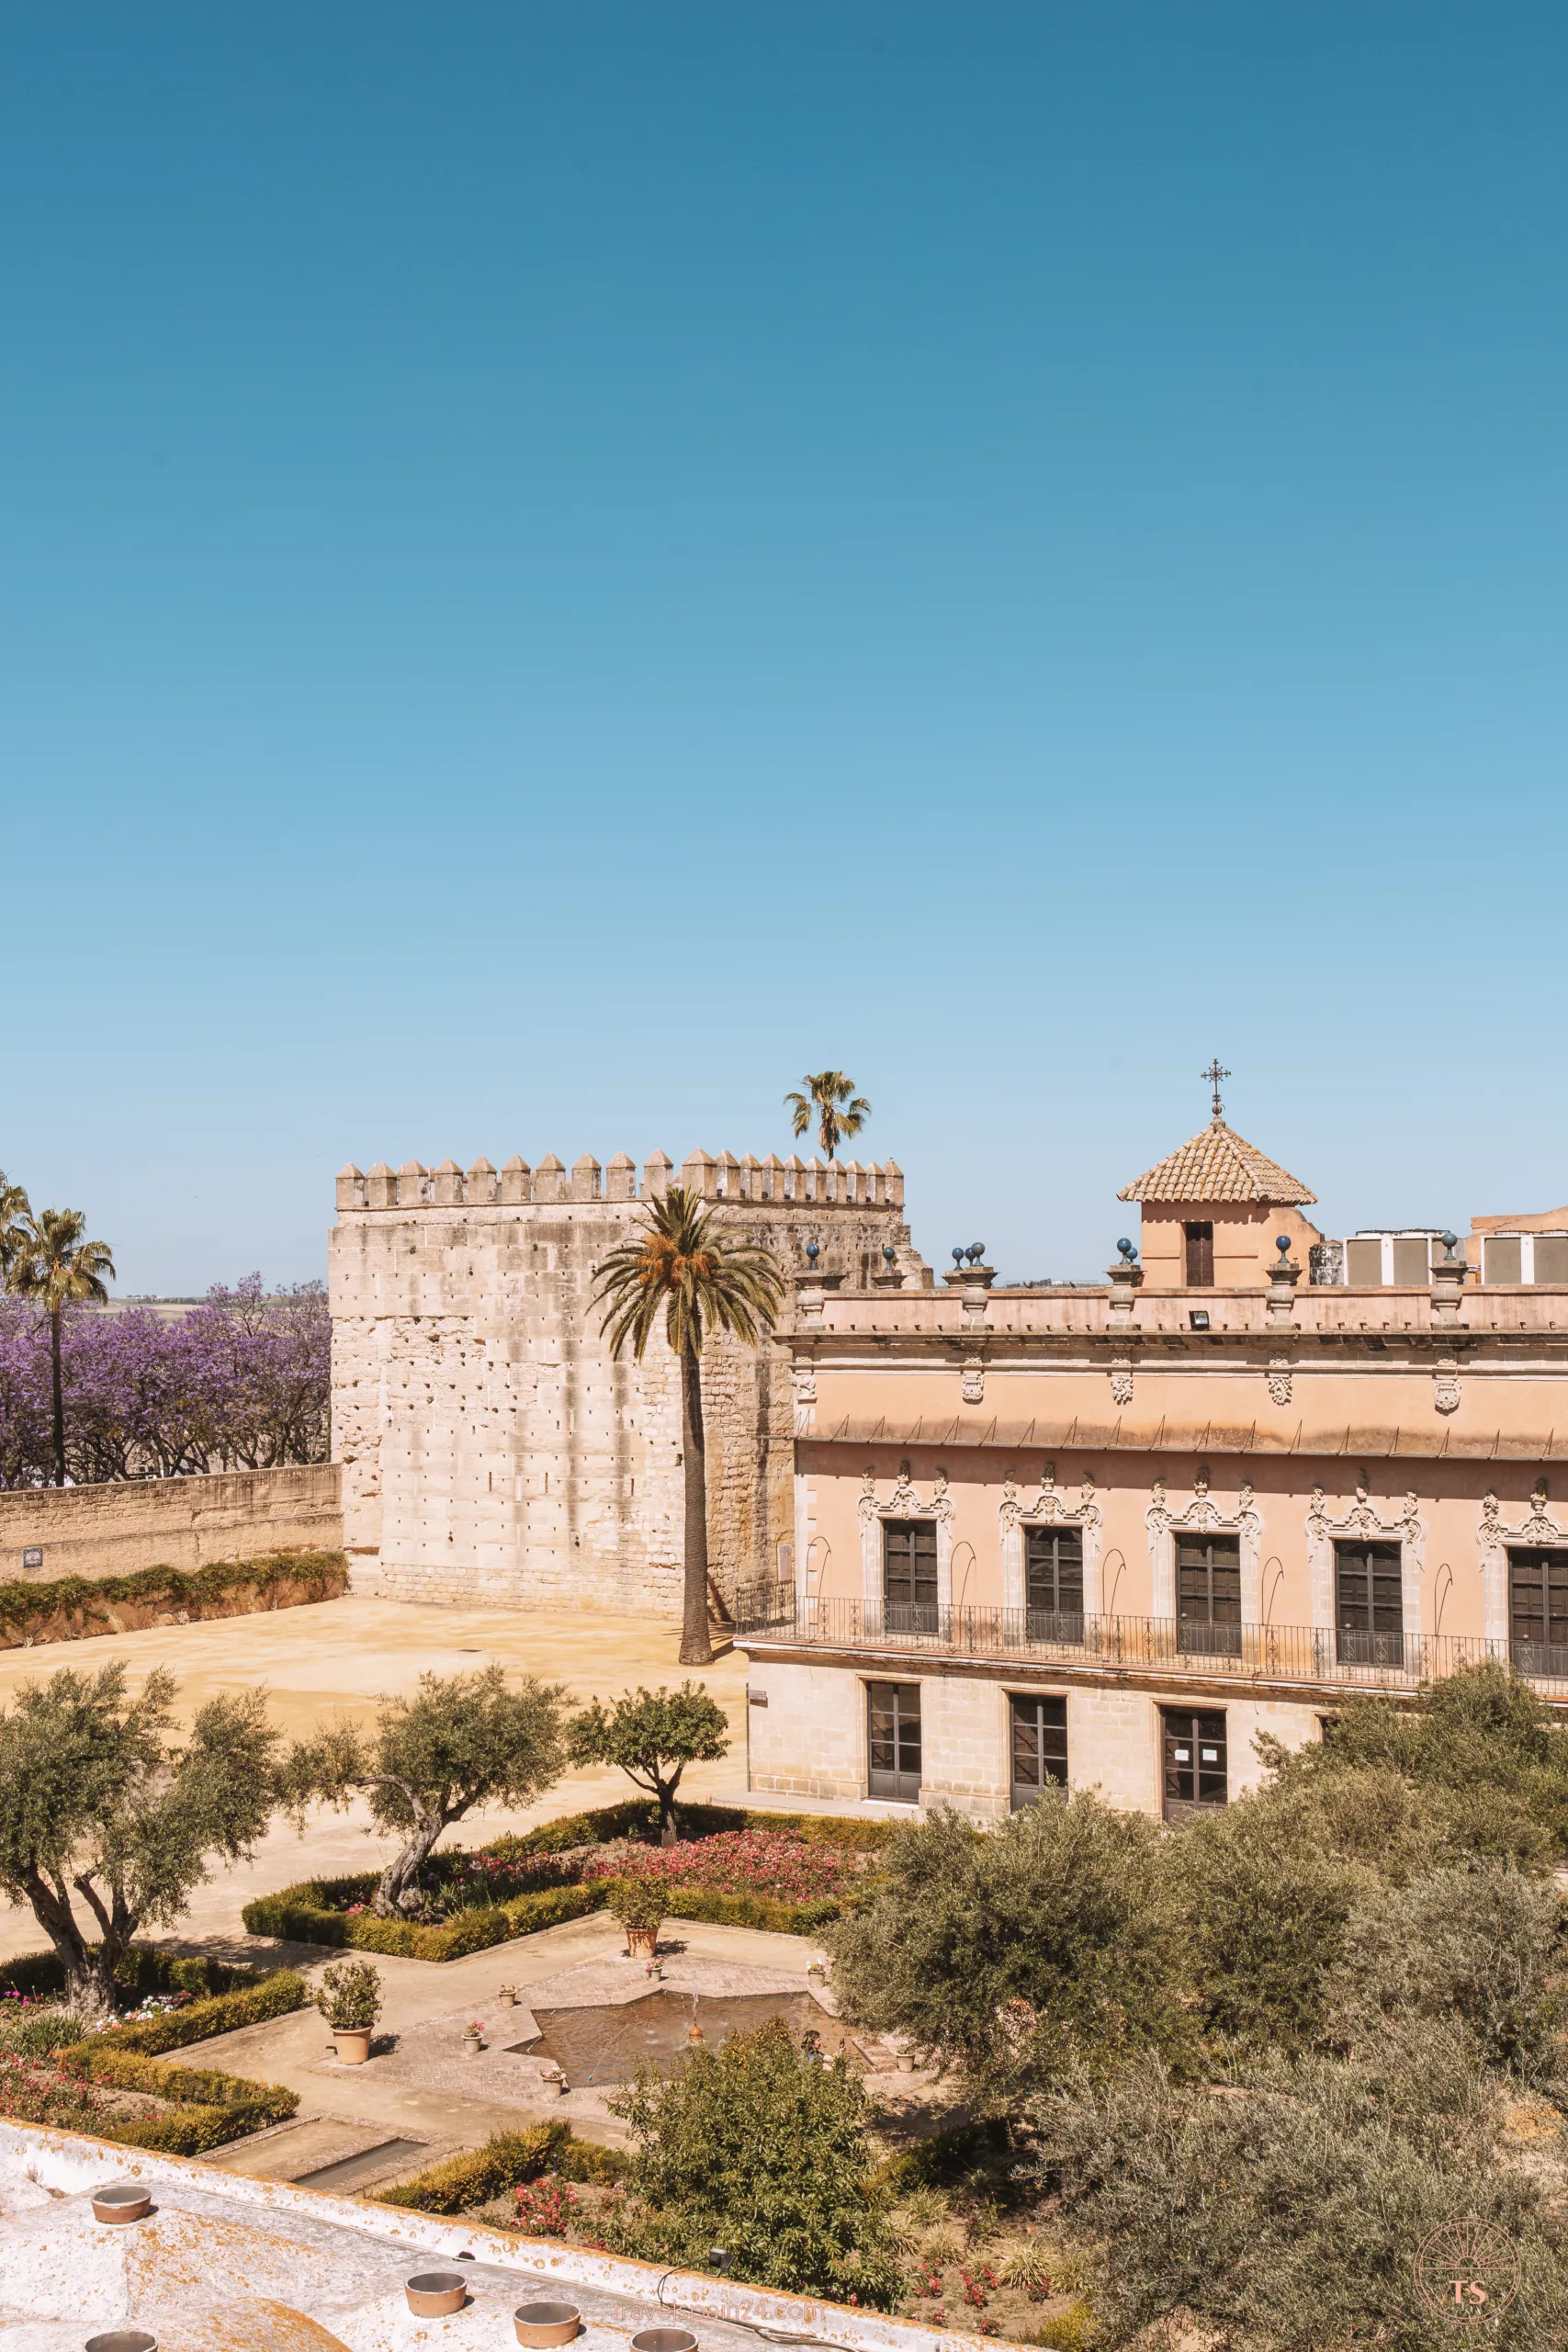 View from the walls of the Alcazar in Jerez de la Frontera, showing the gardens and fountain on a sunny day. This image showcases the Alcazar's beautiful grounds.